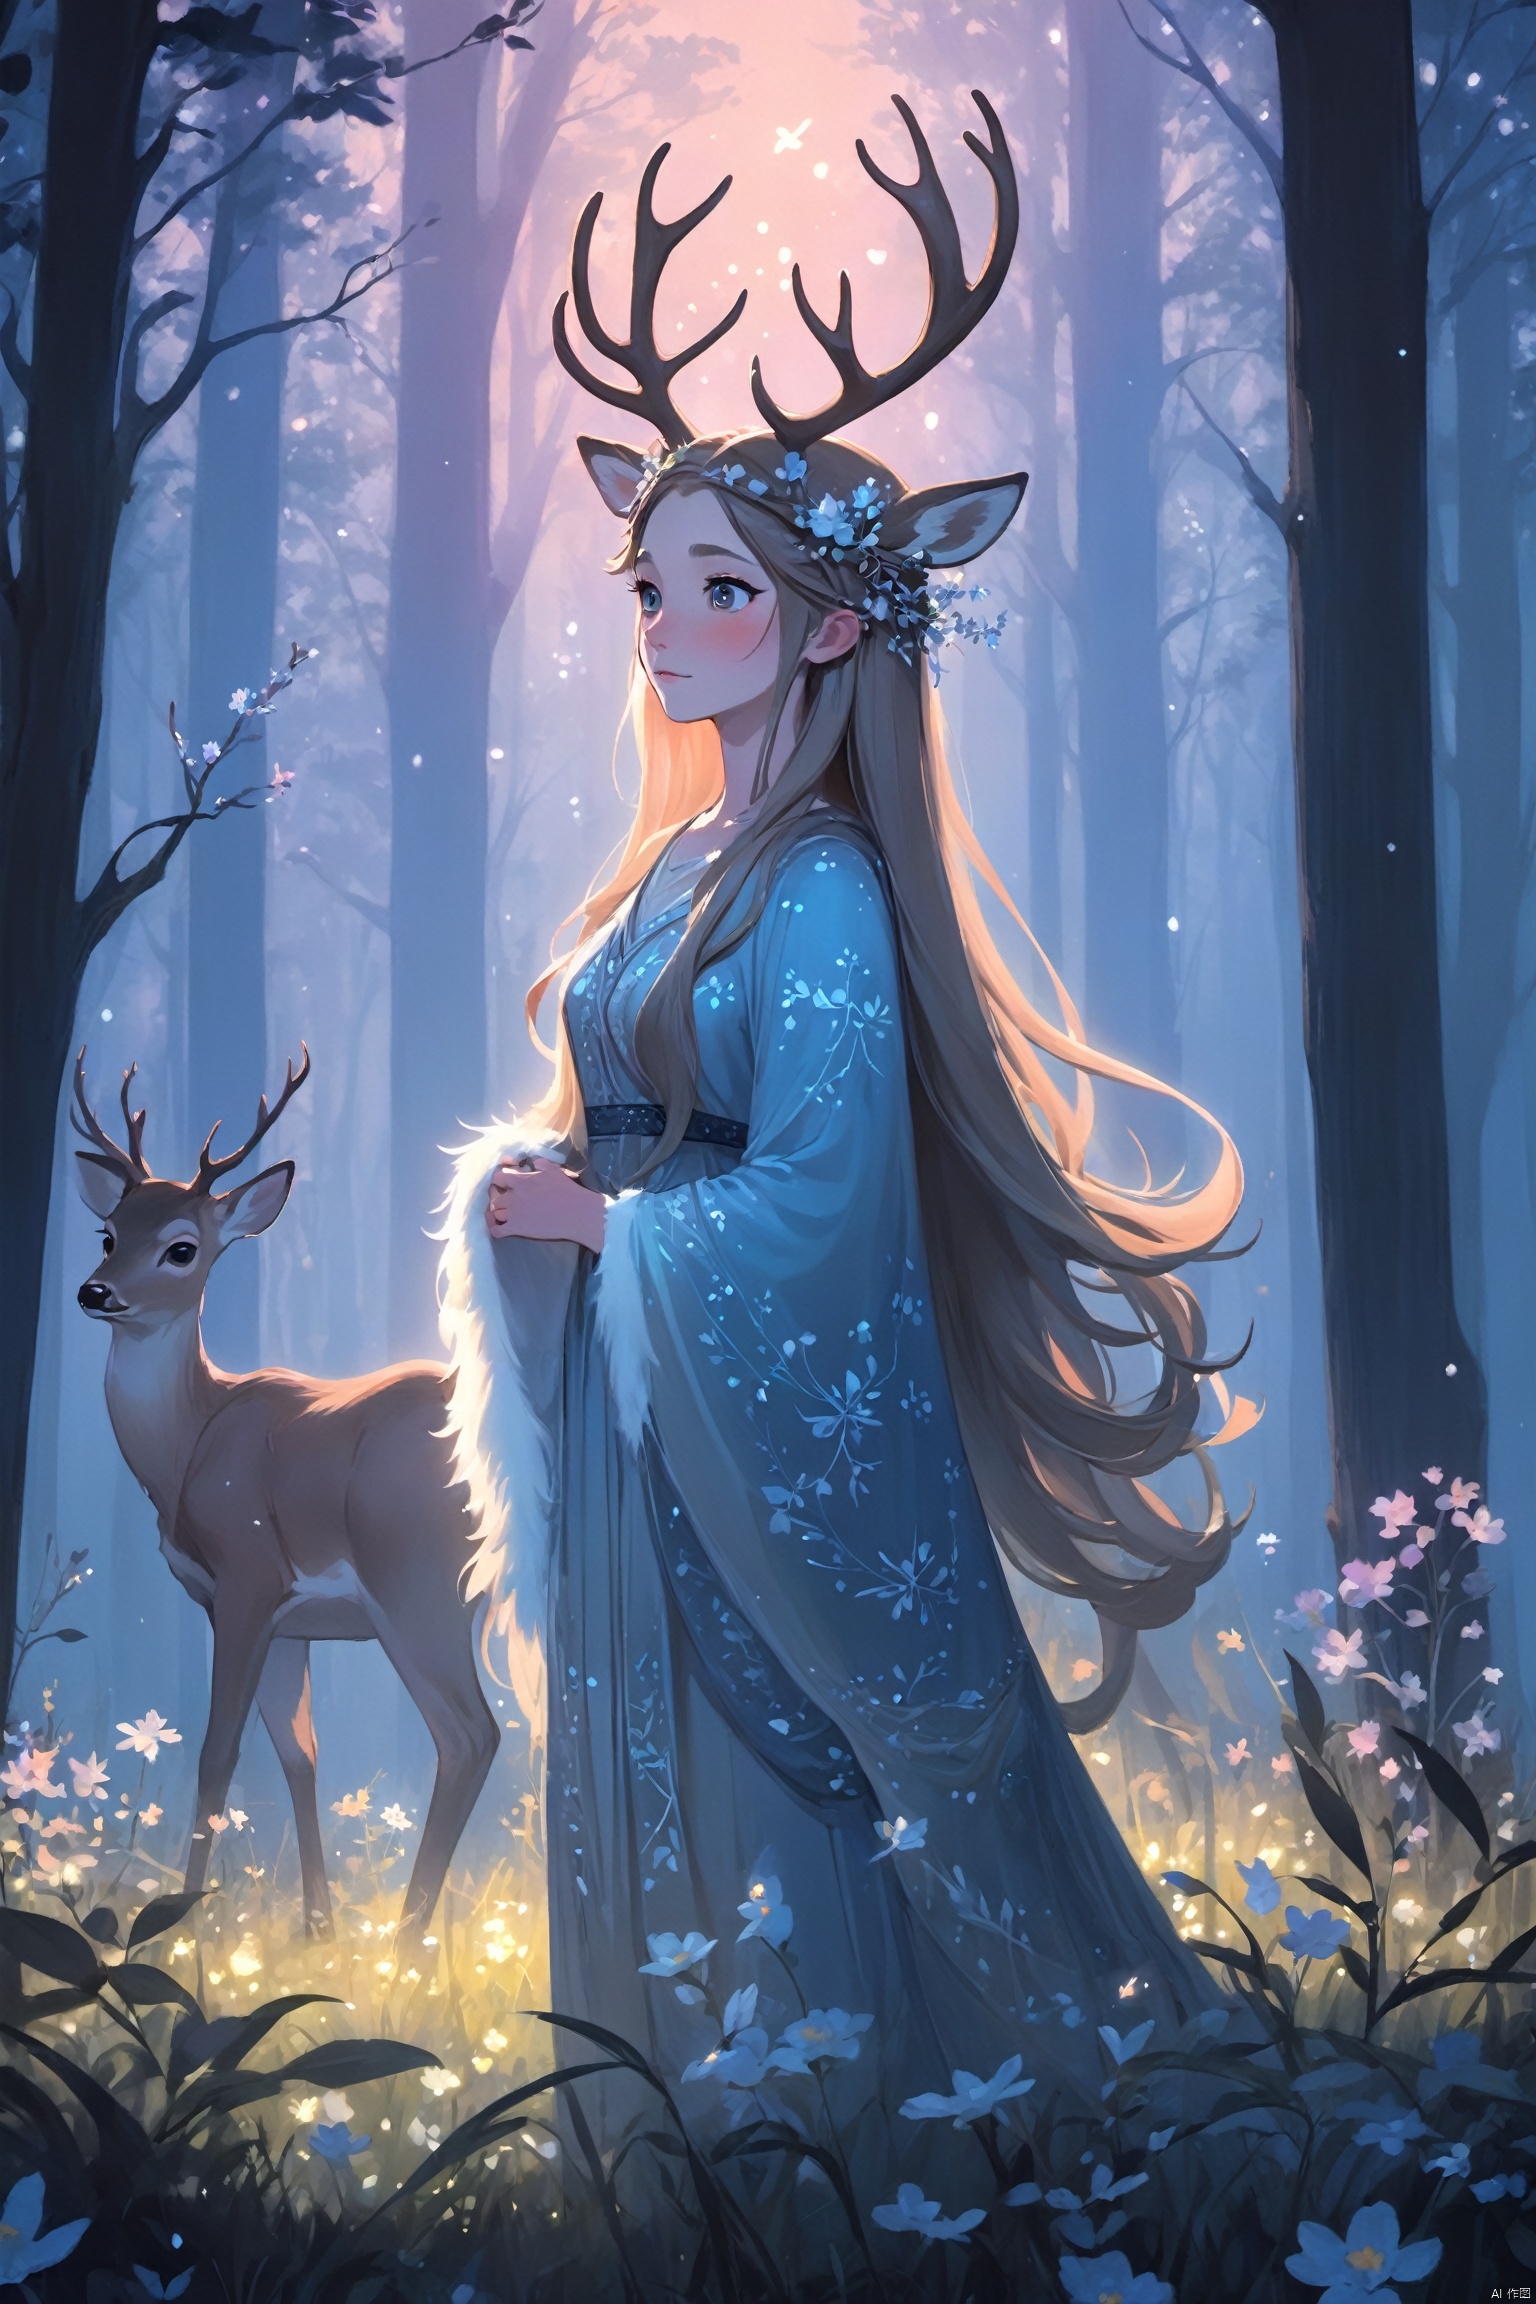 A character with the features of a deer, her antlers adorned with flowers, stands in a forest clearing at twilight. The soft, blue light of the evening sky filters through the trees, casting a cool, ethereal glow on her face and the delicate patterns on her fur. The forest is quiet, and the light creates a peaceful ambiance as she gazes into the distance.